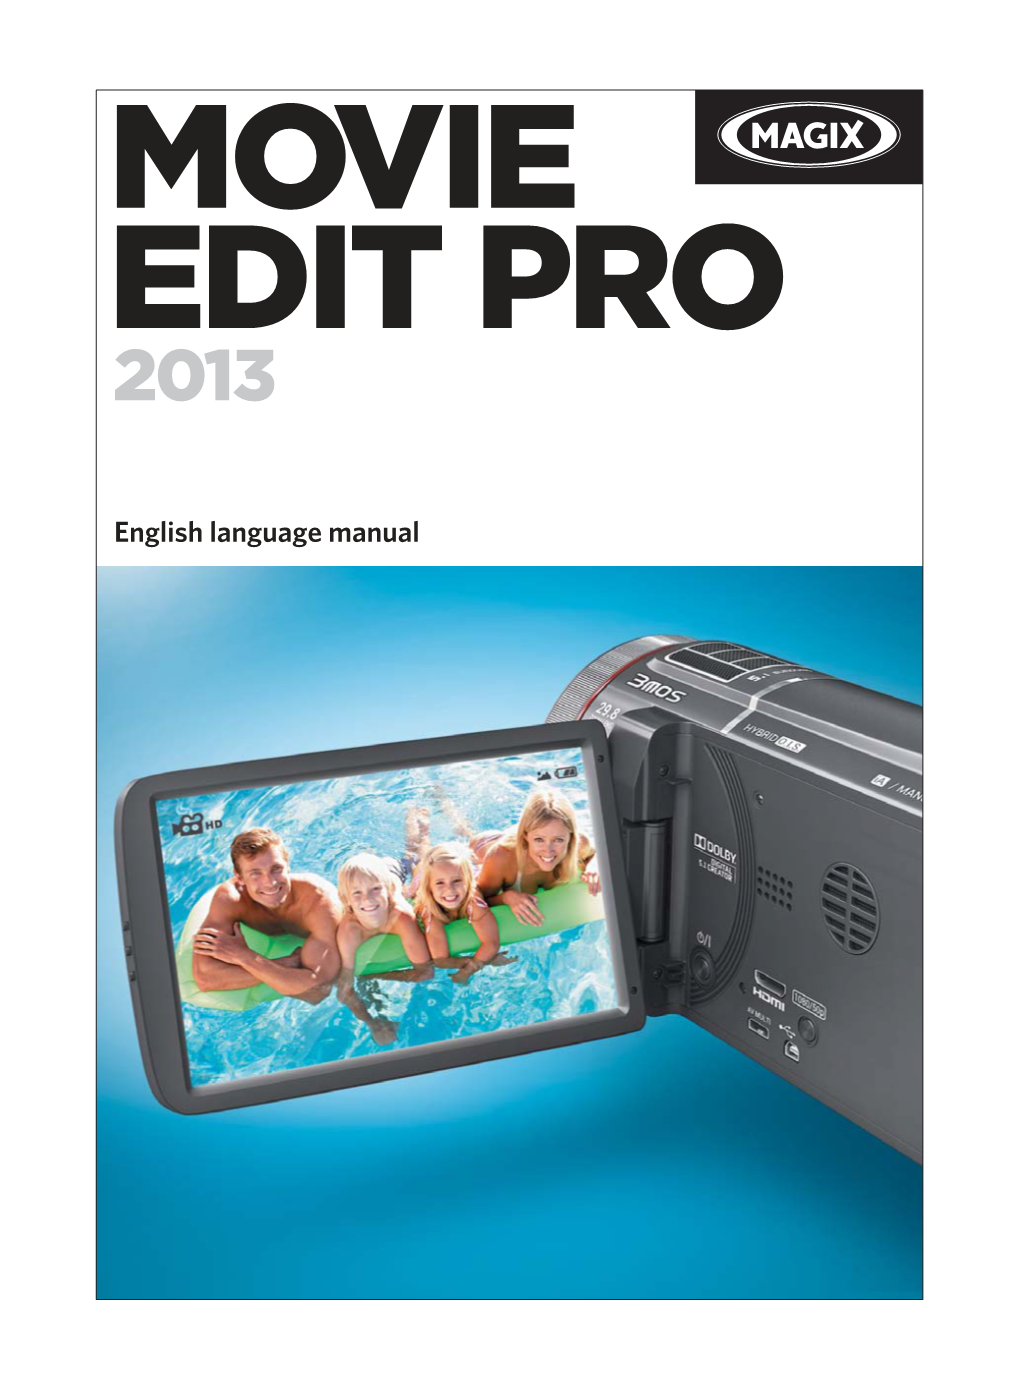 MAGIX Movie Edit Pro 2013 Also Offers